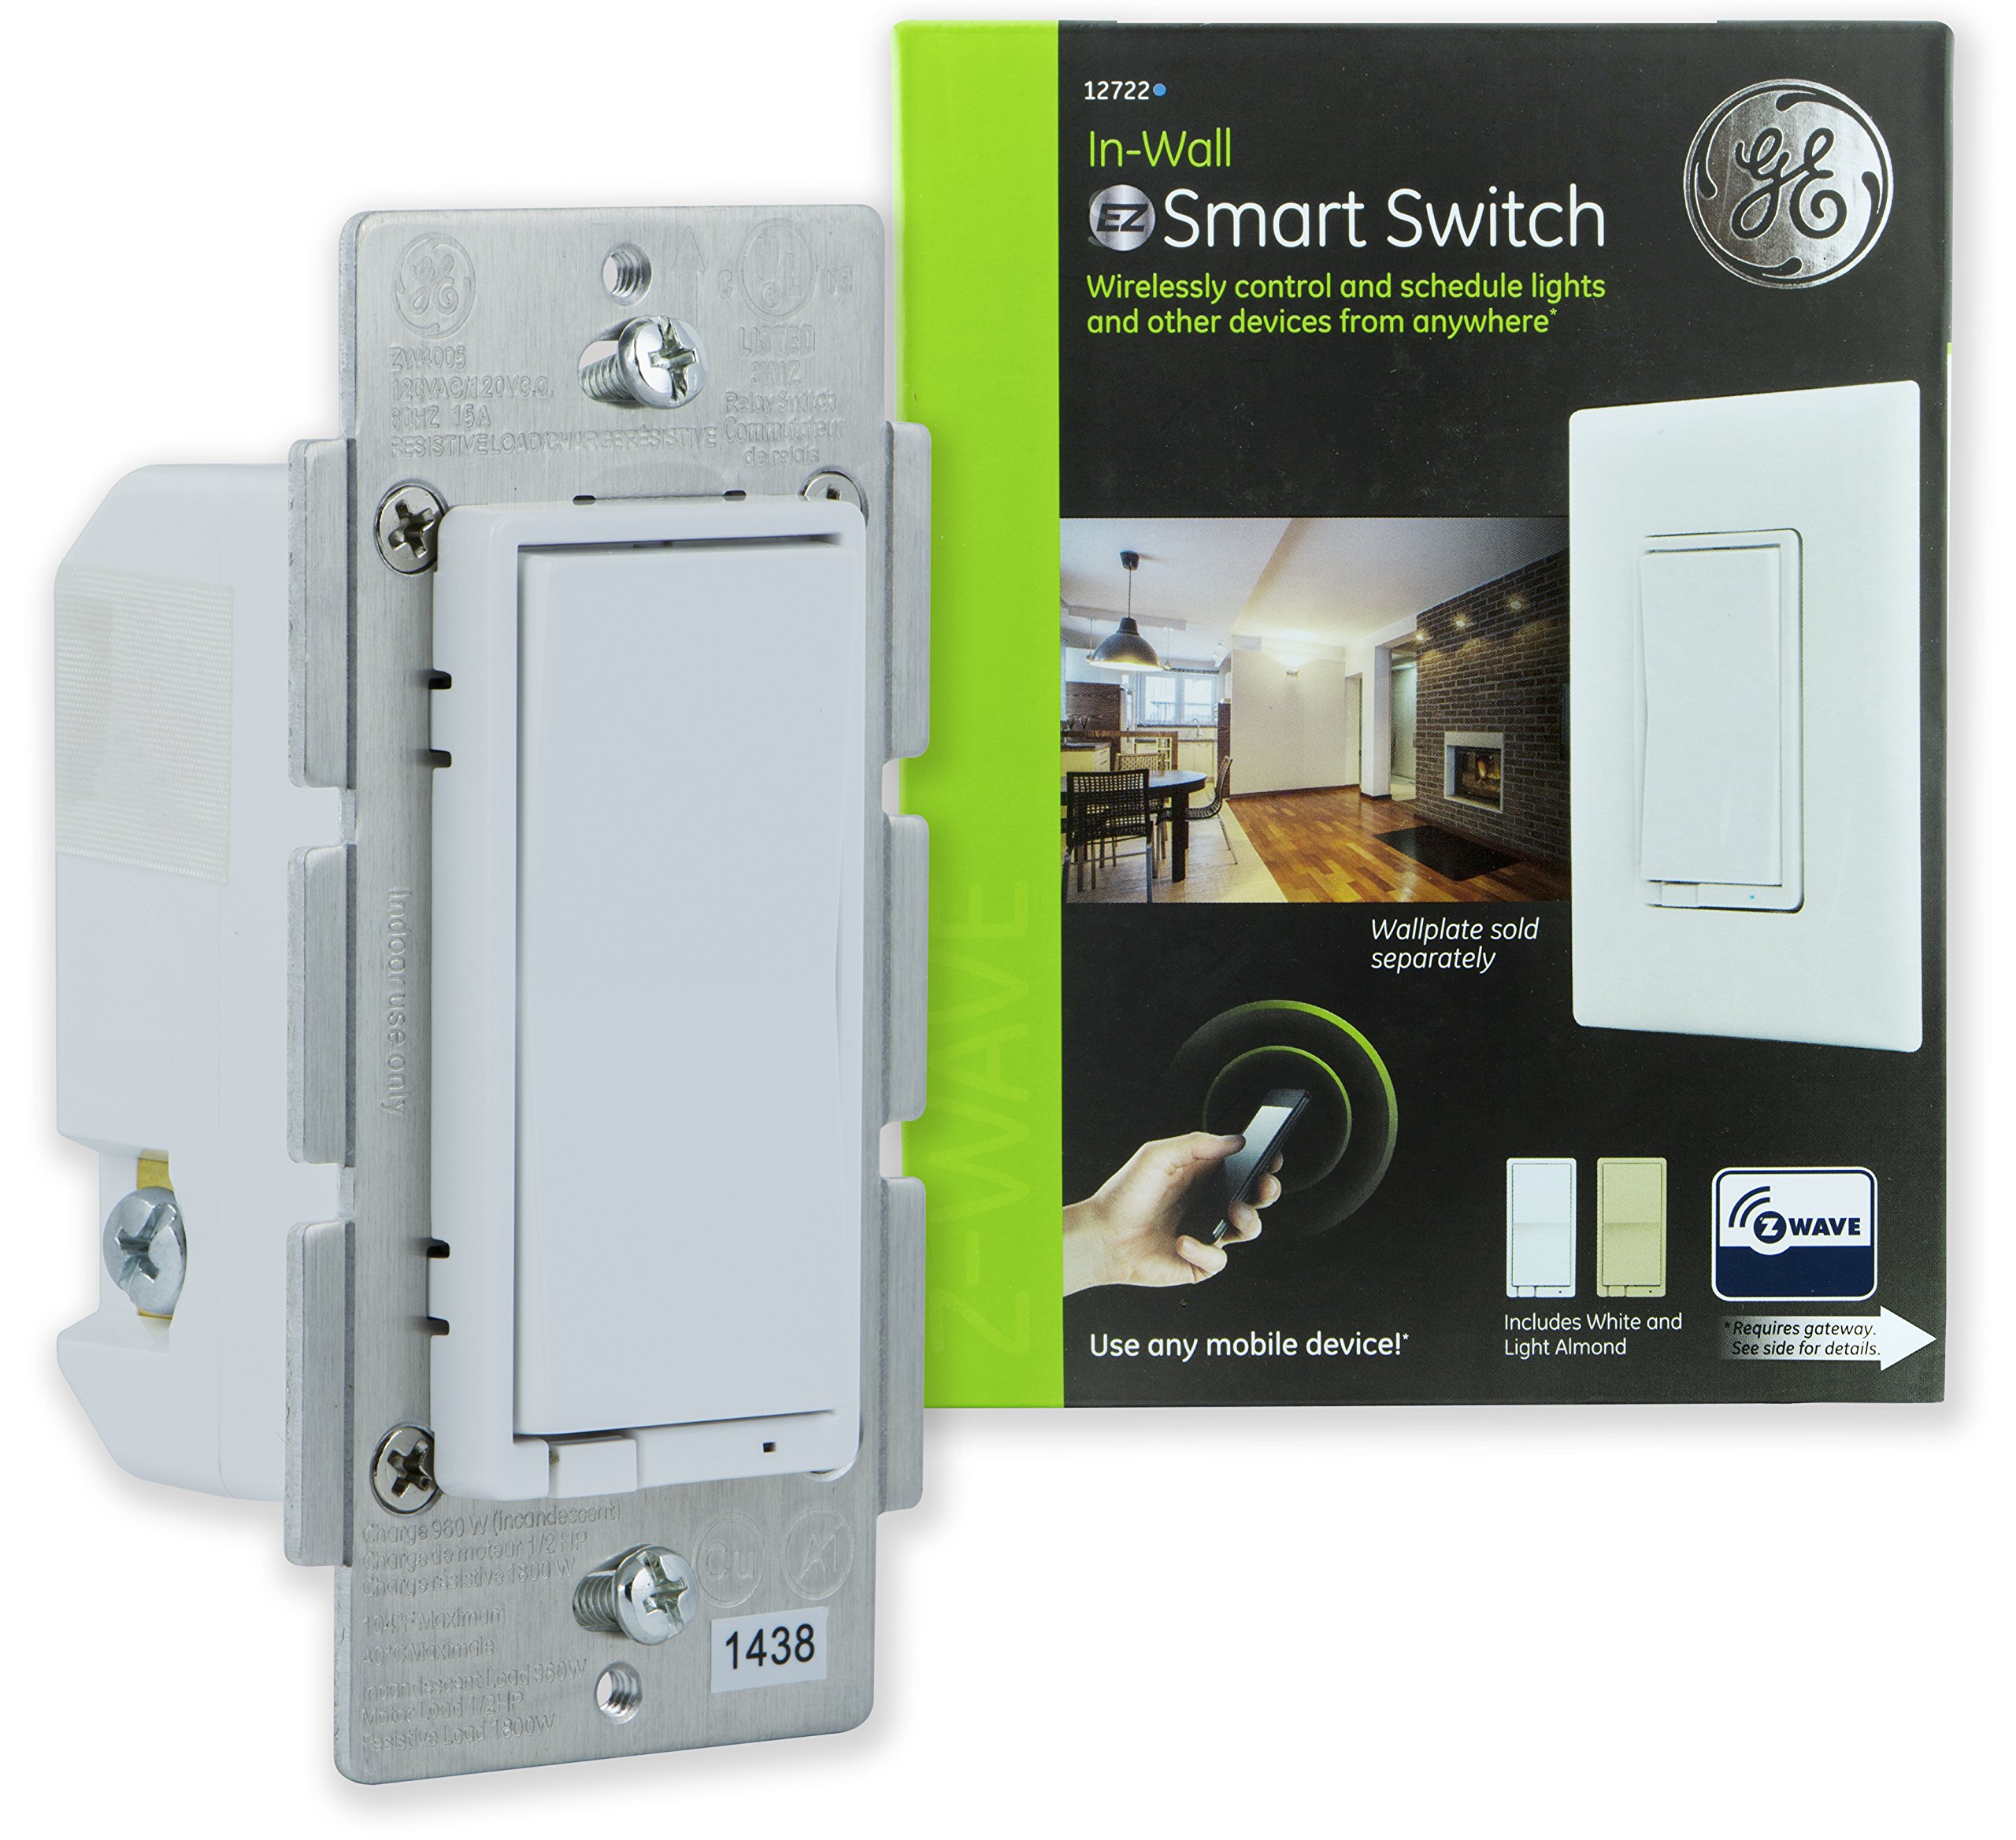 GE Z-Wave Wireless Smart Lighting Control Light Switch, On/Off Paddle, In-Wall, White & Lt. Almond Paddles, Repeater & Range Extender, Zwave Hub Required- Works with SmartThings Wink and Alexa, 12722